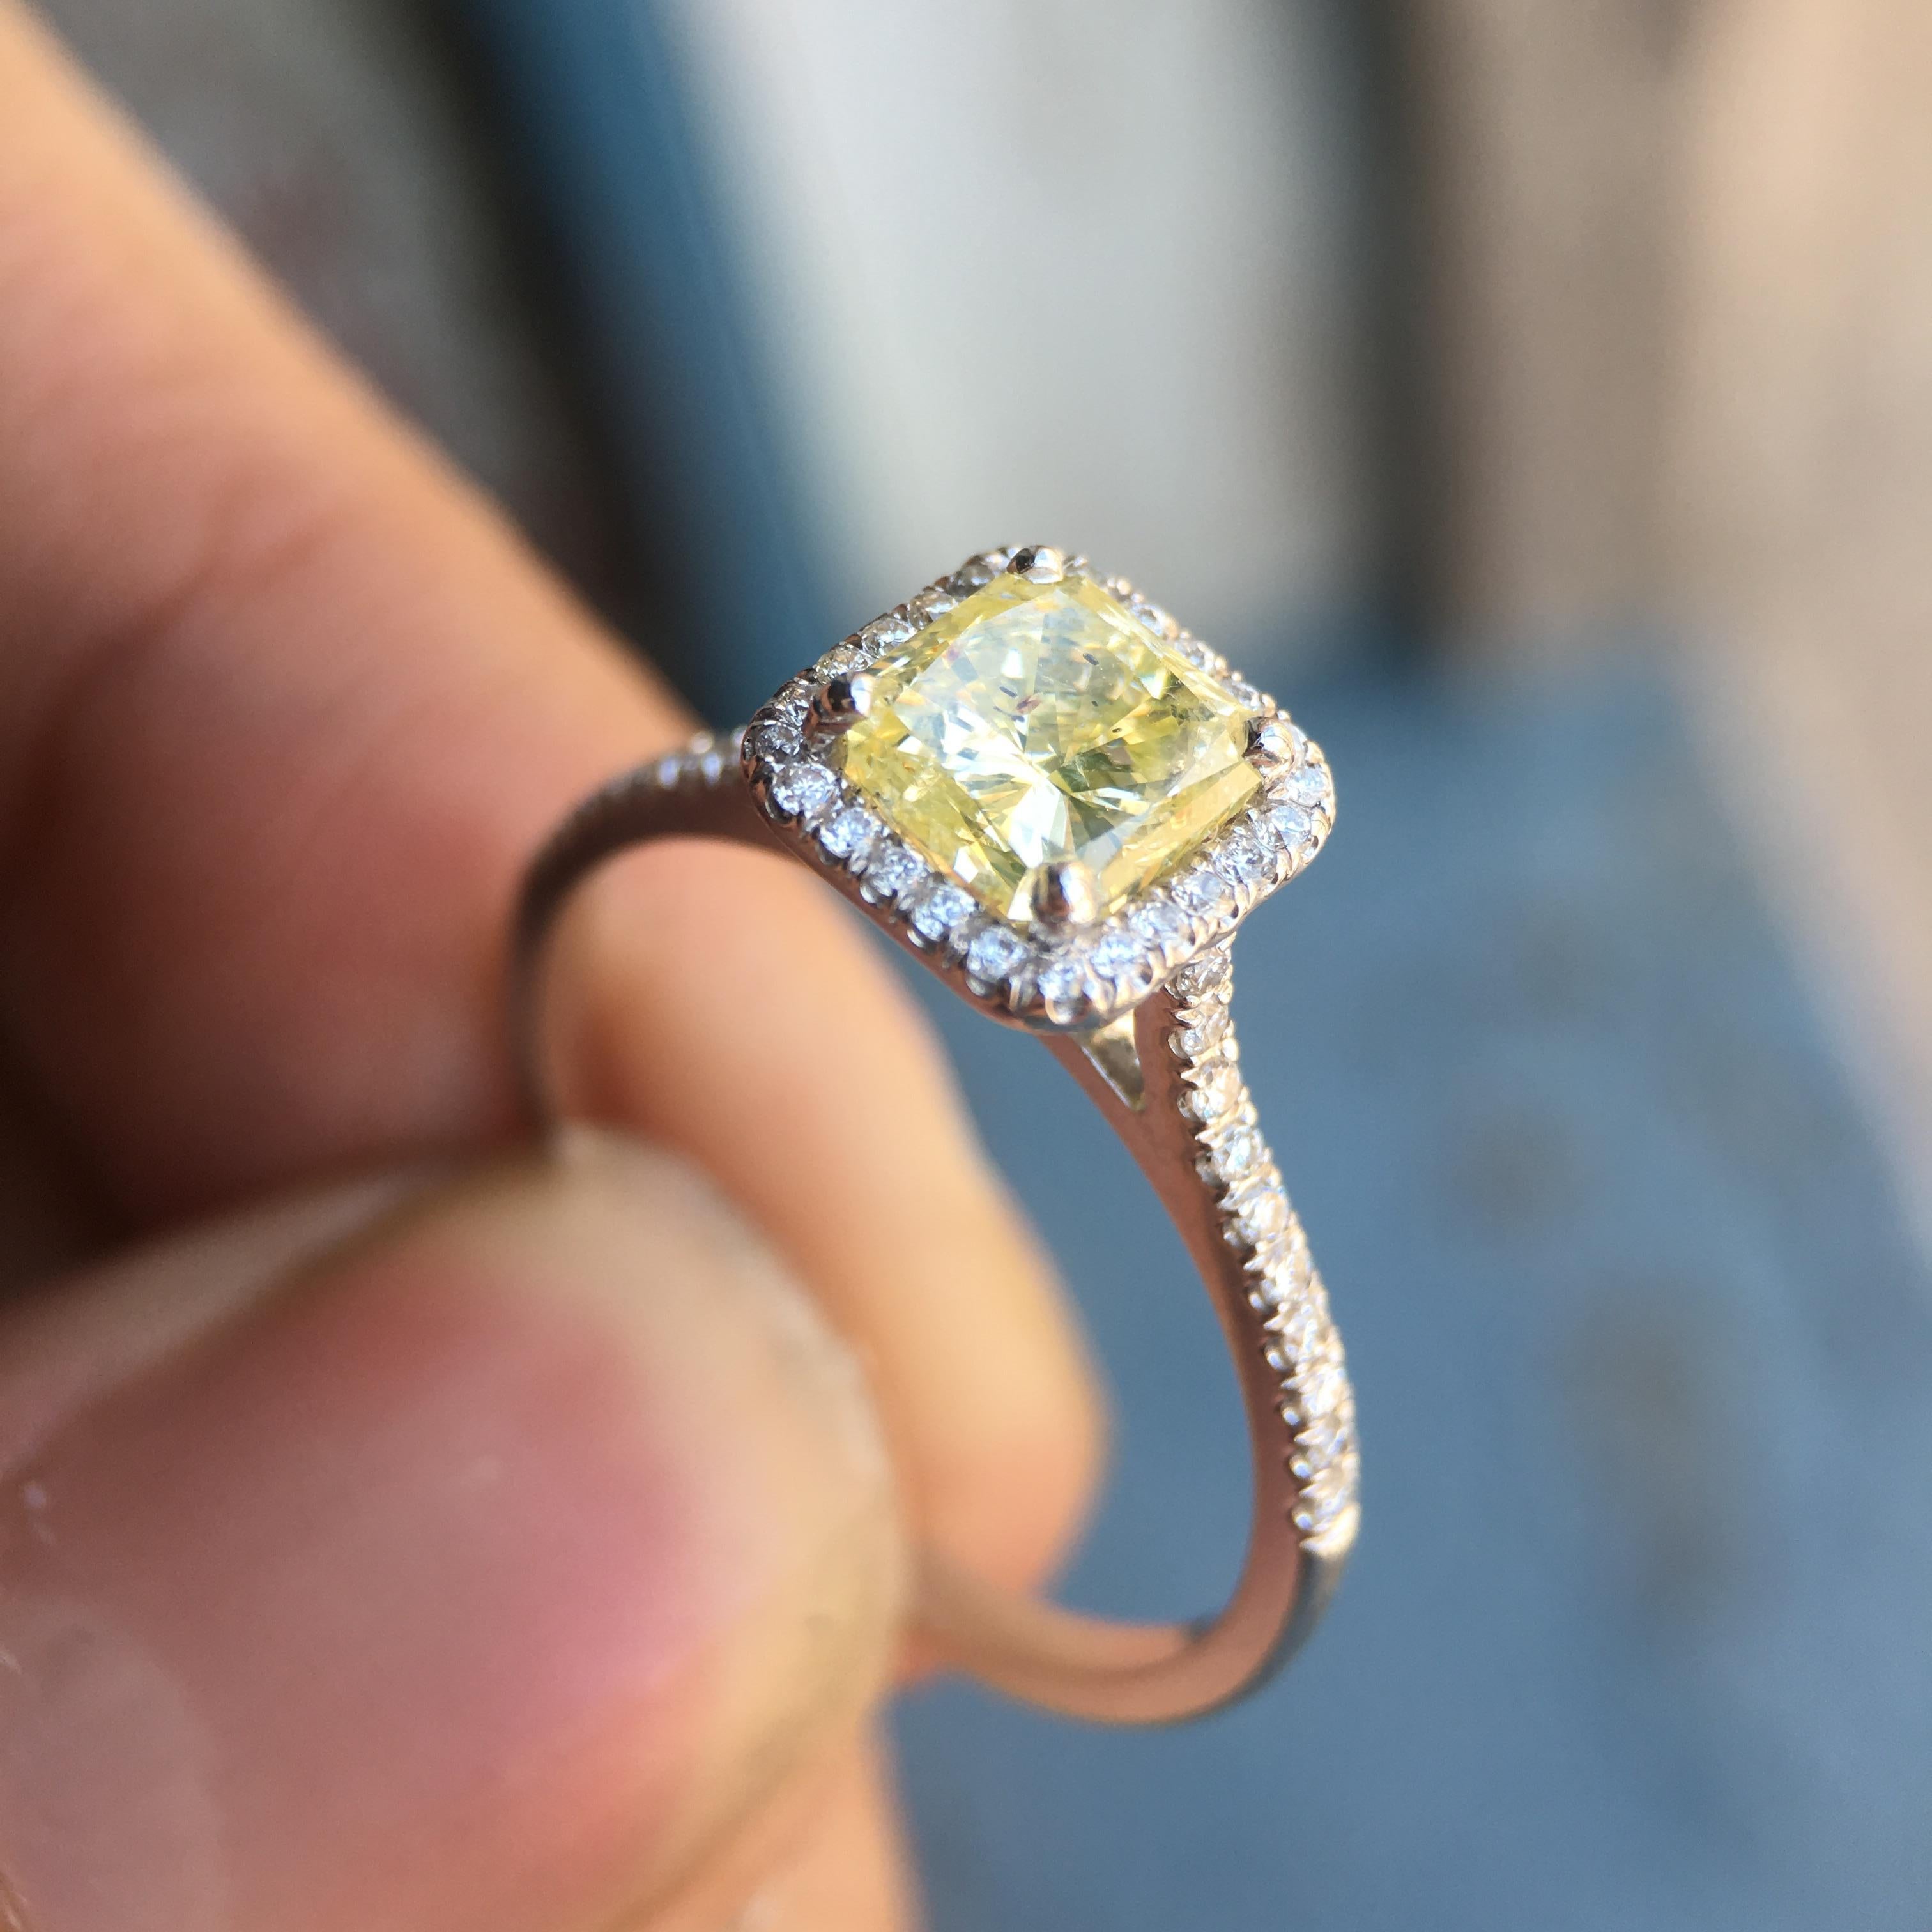 Ring will be made to order to your finger size  takes approximately 3-6 business weeks.

Retail Replacement Appraisal Price - $8,500.00

1.35 Carat Total Weight (Apprx) Diamond and 18k White Gold Engagement Ring 

 Center Stone is a Fancy Yellow